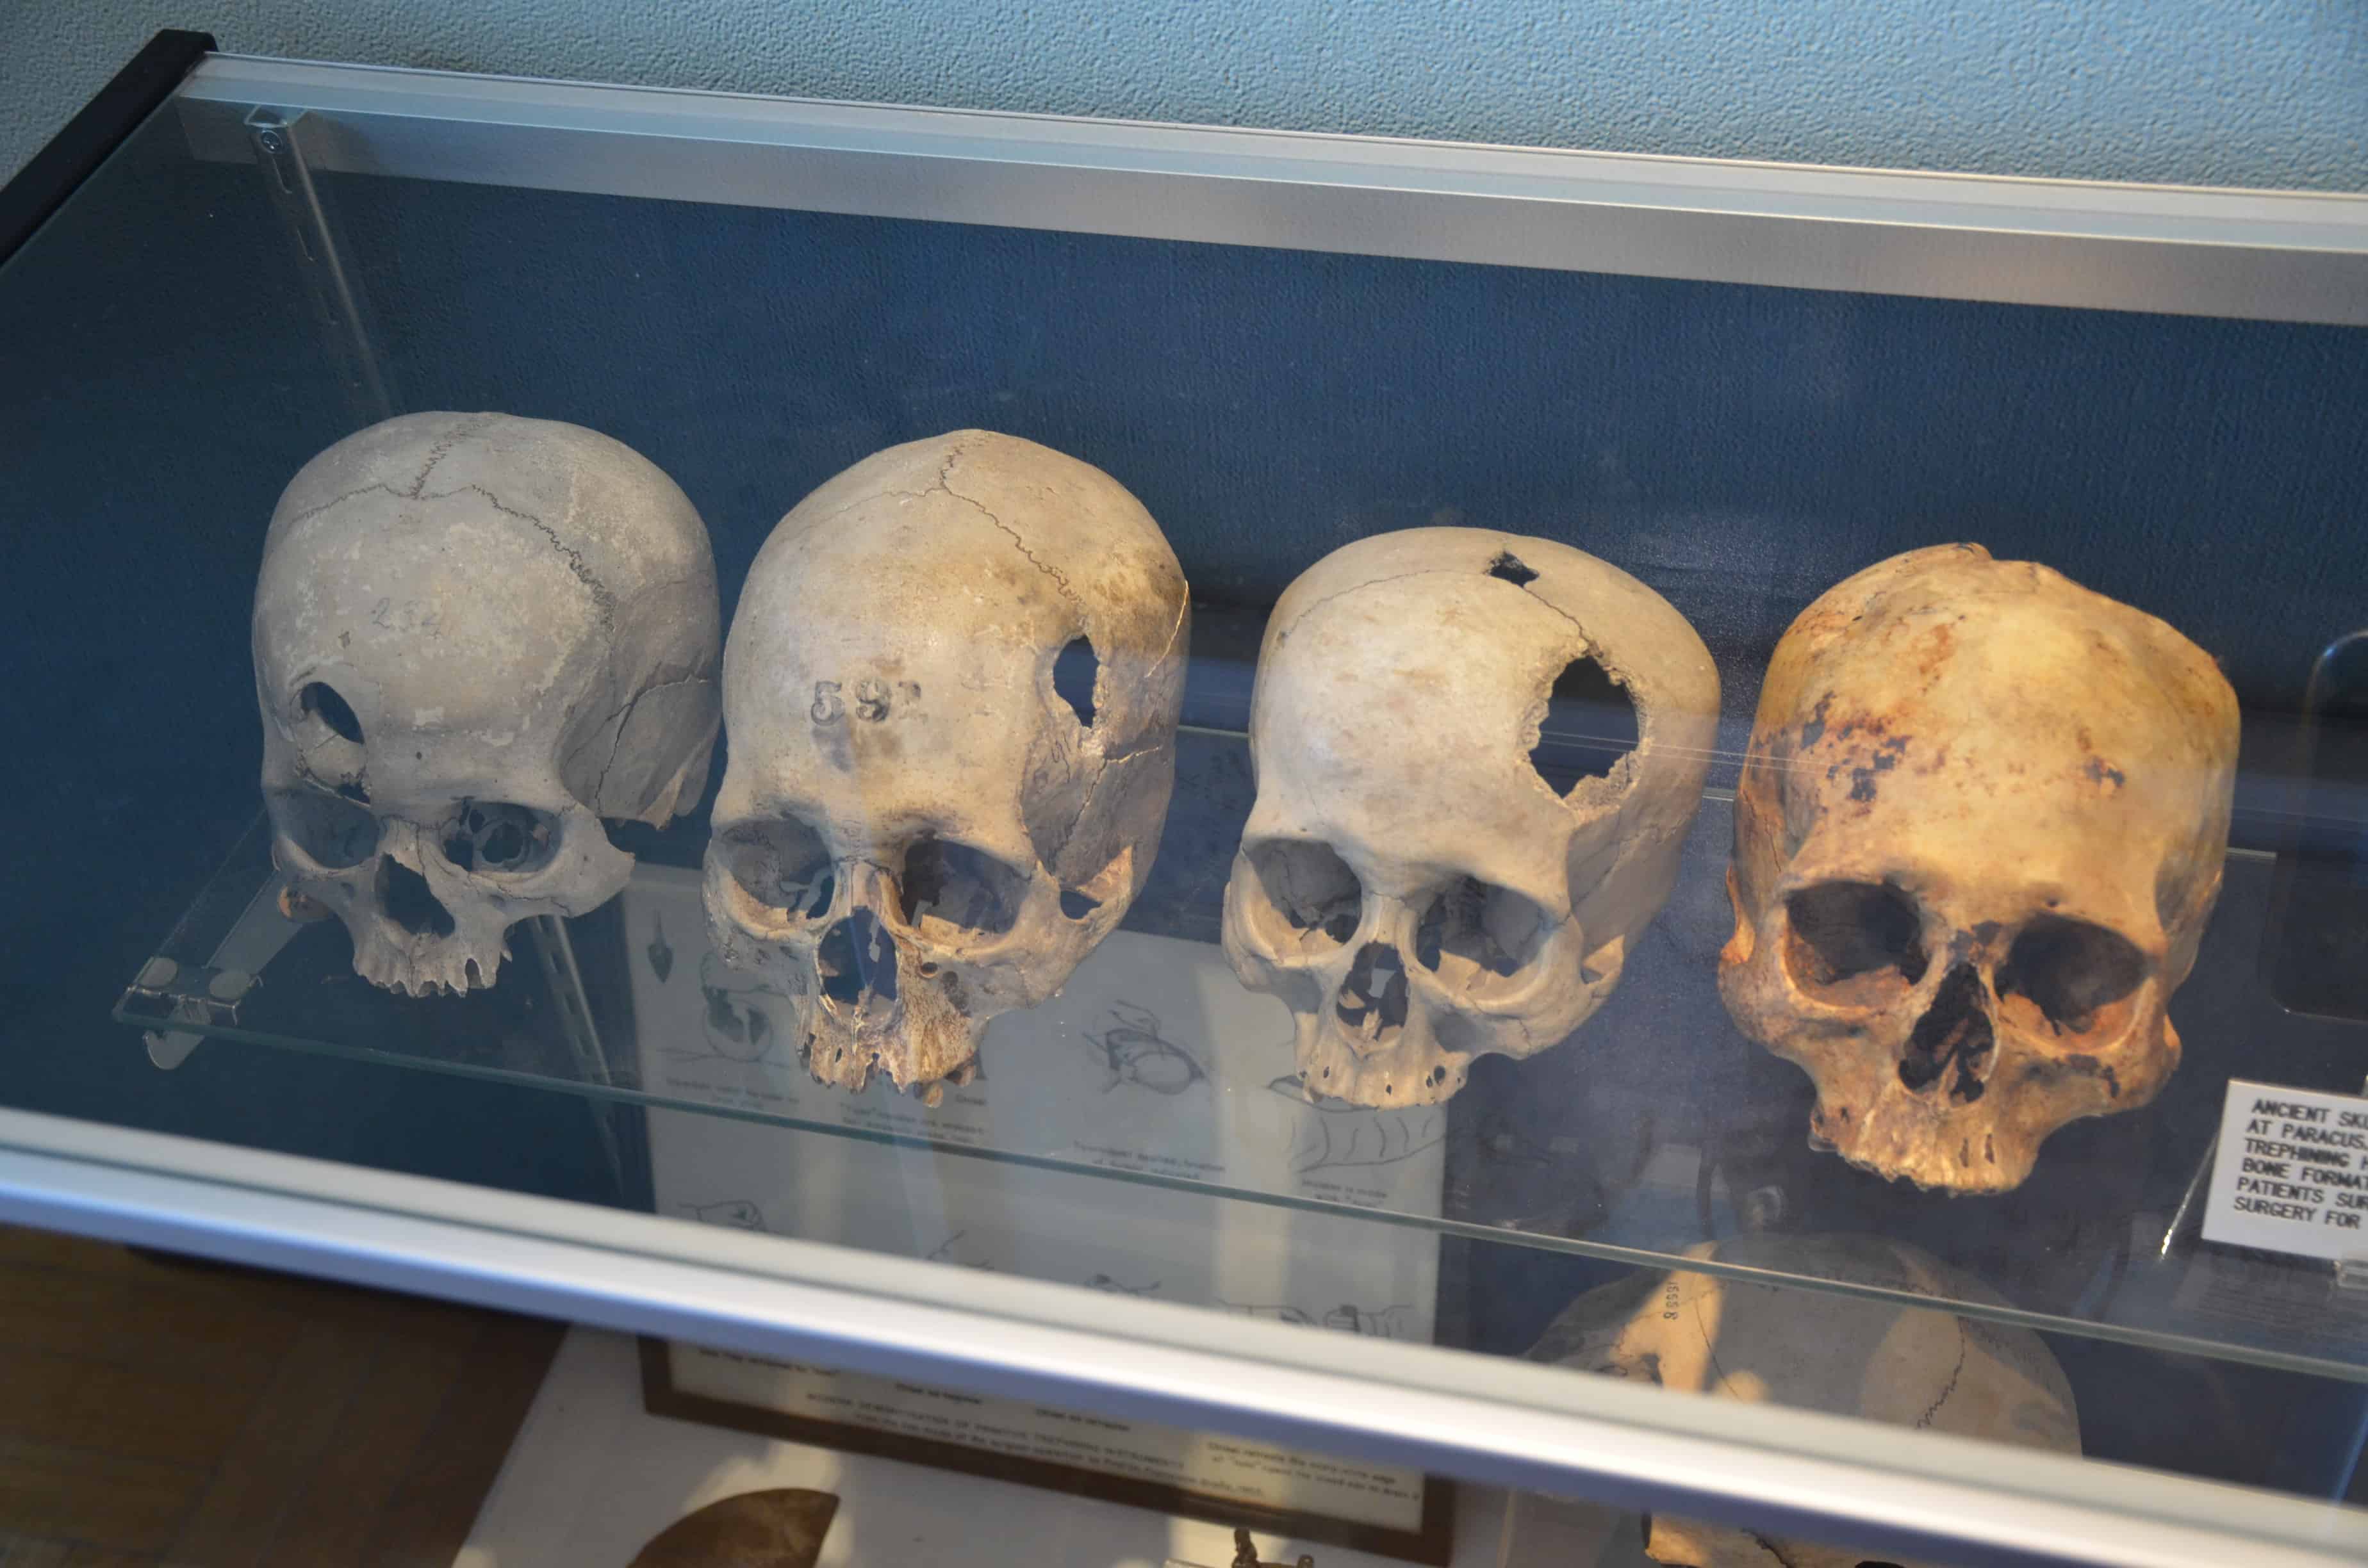 Peruvian skulls at the International Museum of Surgical Science in Gold Coast, Chicago